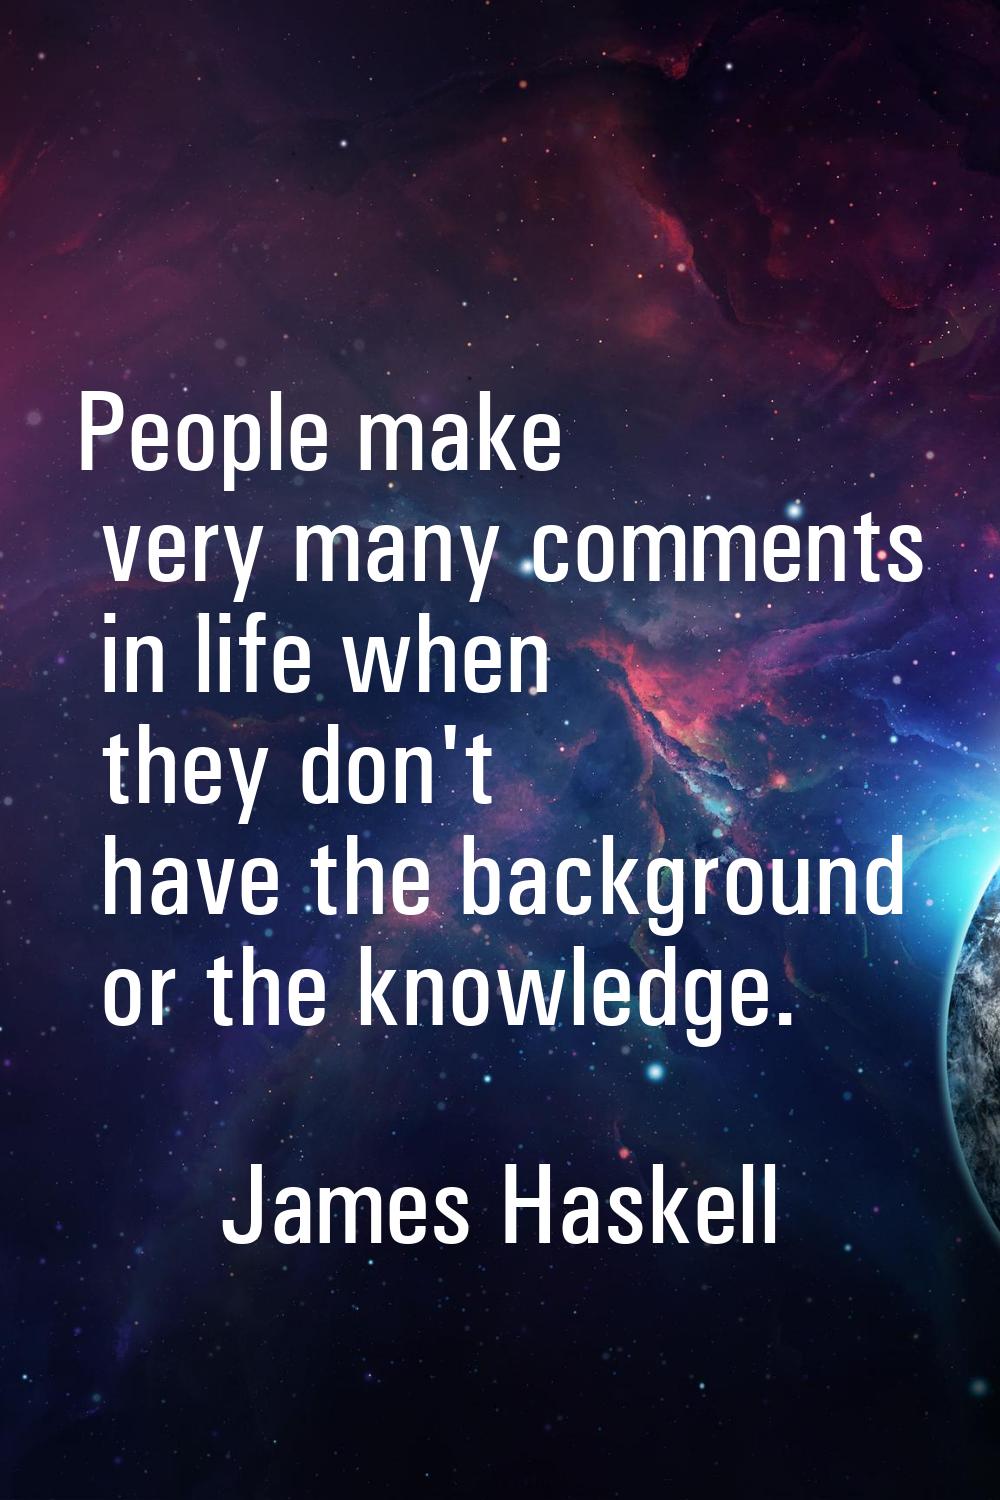 People make very many comments in life when they don't have the background or the knowledge.